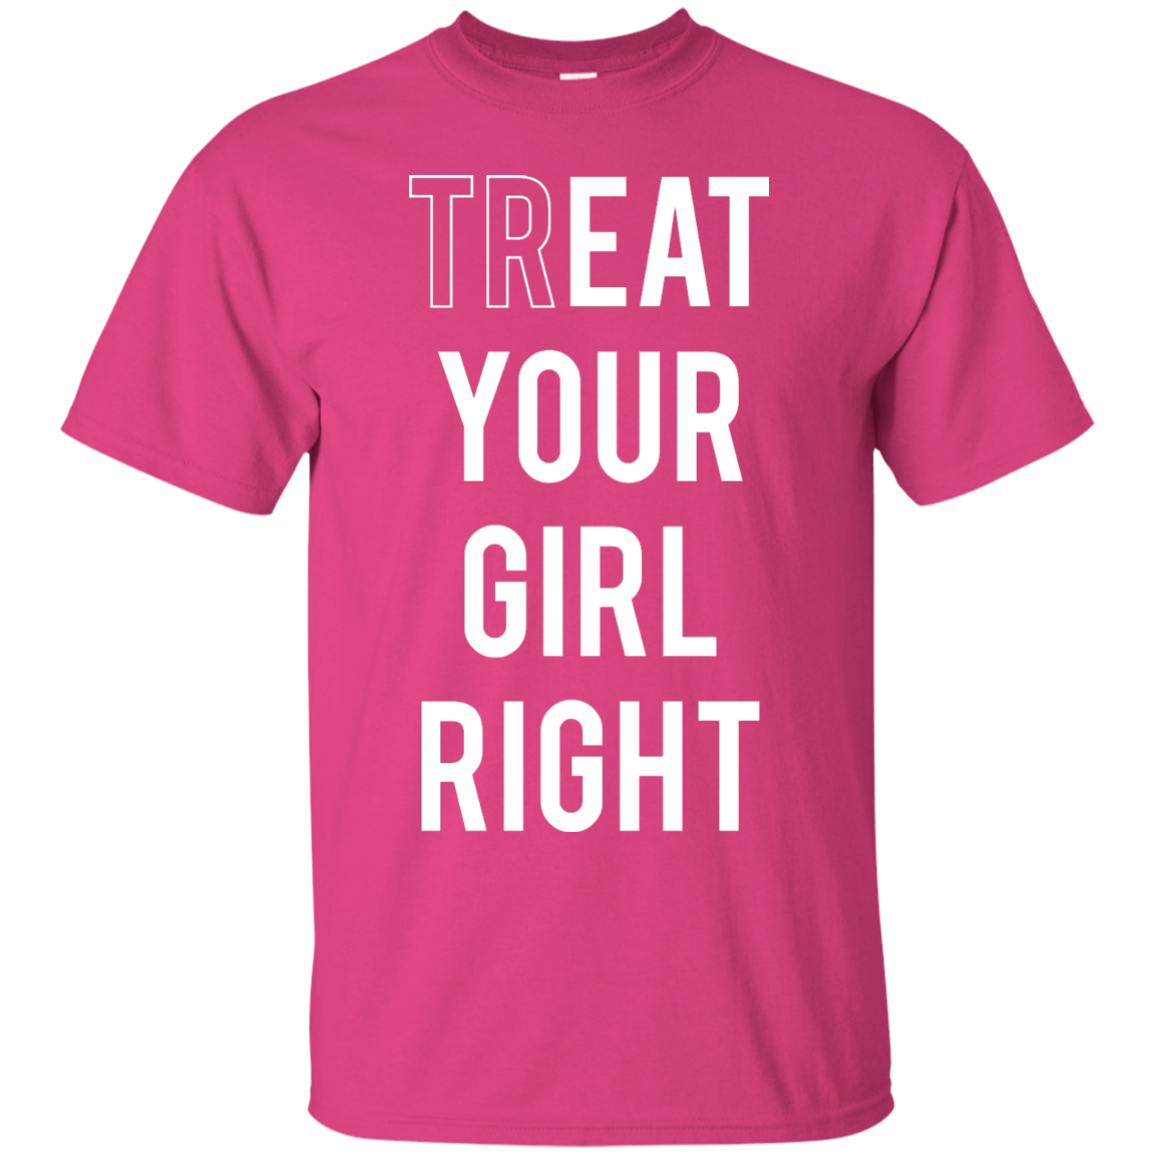 pink color funny quote tshirt for girls/women/lesbian